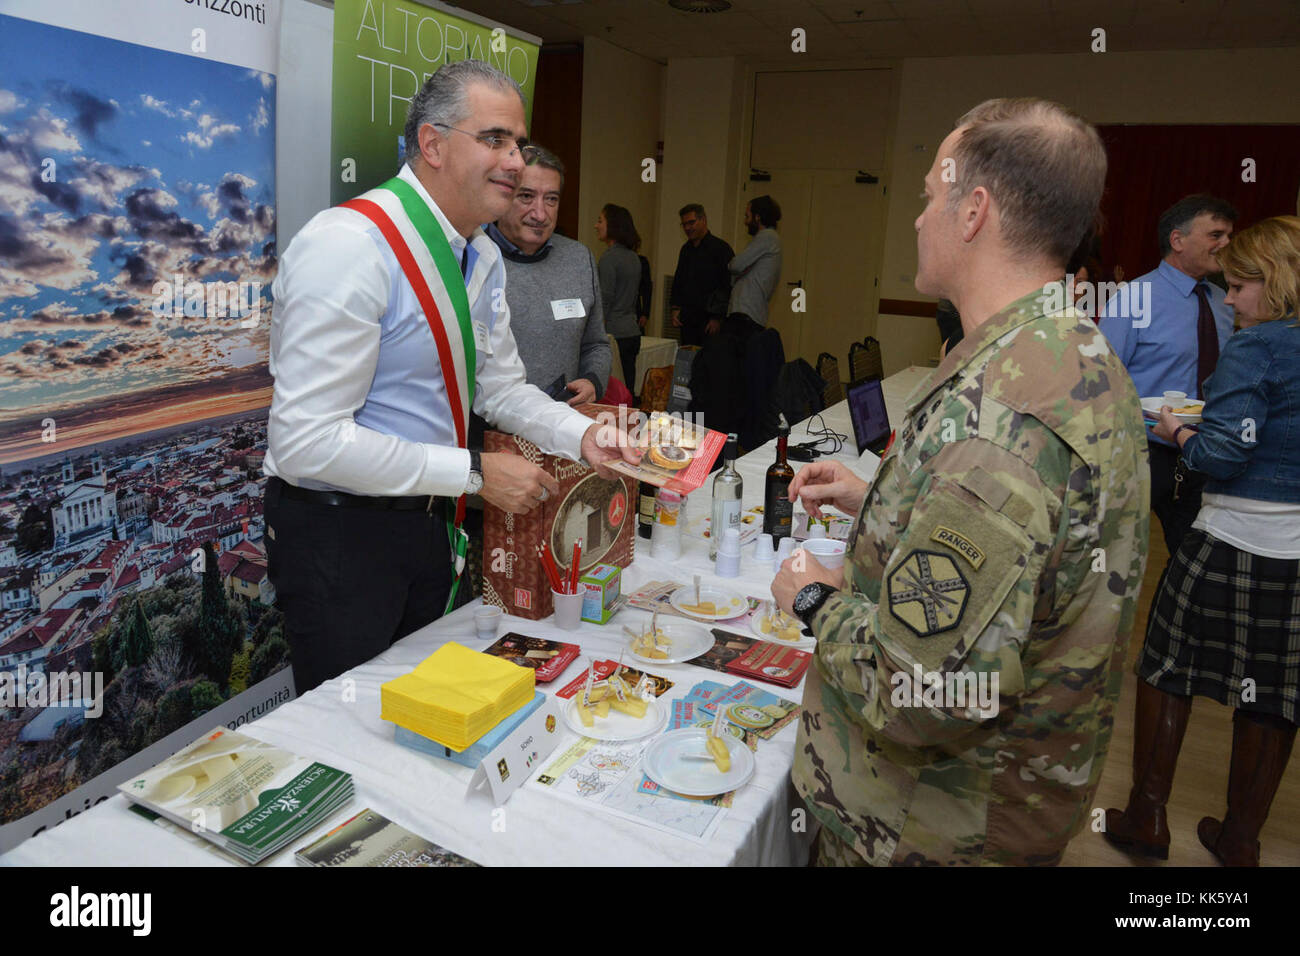 U.S. Col. Eric M. Berdy, U.S. Army Garrison Italy commander, speaks with Roberto Polga, deputy mayor of Schio, during the Meet the Mayors event at the Golden Lion Conference Center on Caserma Ederle, Vicenza, Italy, Nov. 8, 2017.   The event is an informal fair that hosts mayors, council members, and cultural and tourism representatives from Italian townships in the Vicenza and Padova provinces. (U.S. Army Photo by Paolo Bovo) Stock Photo